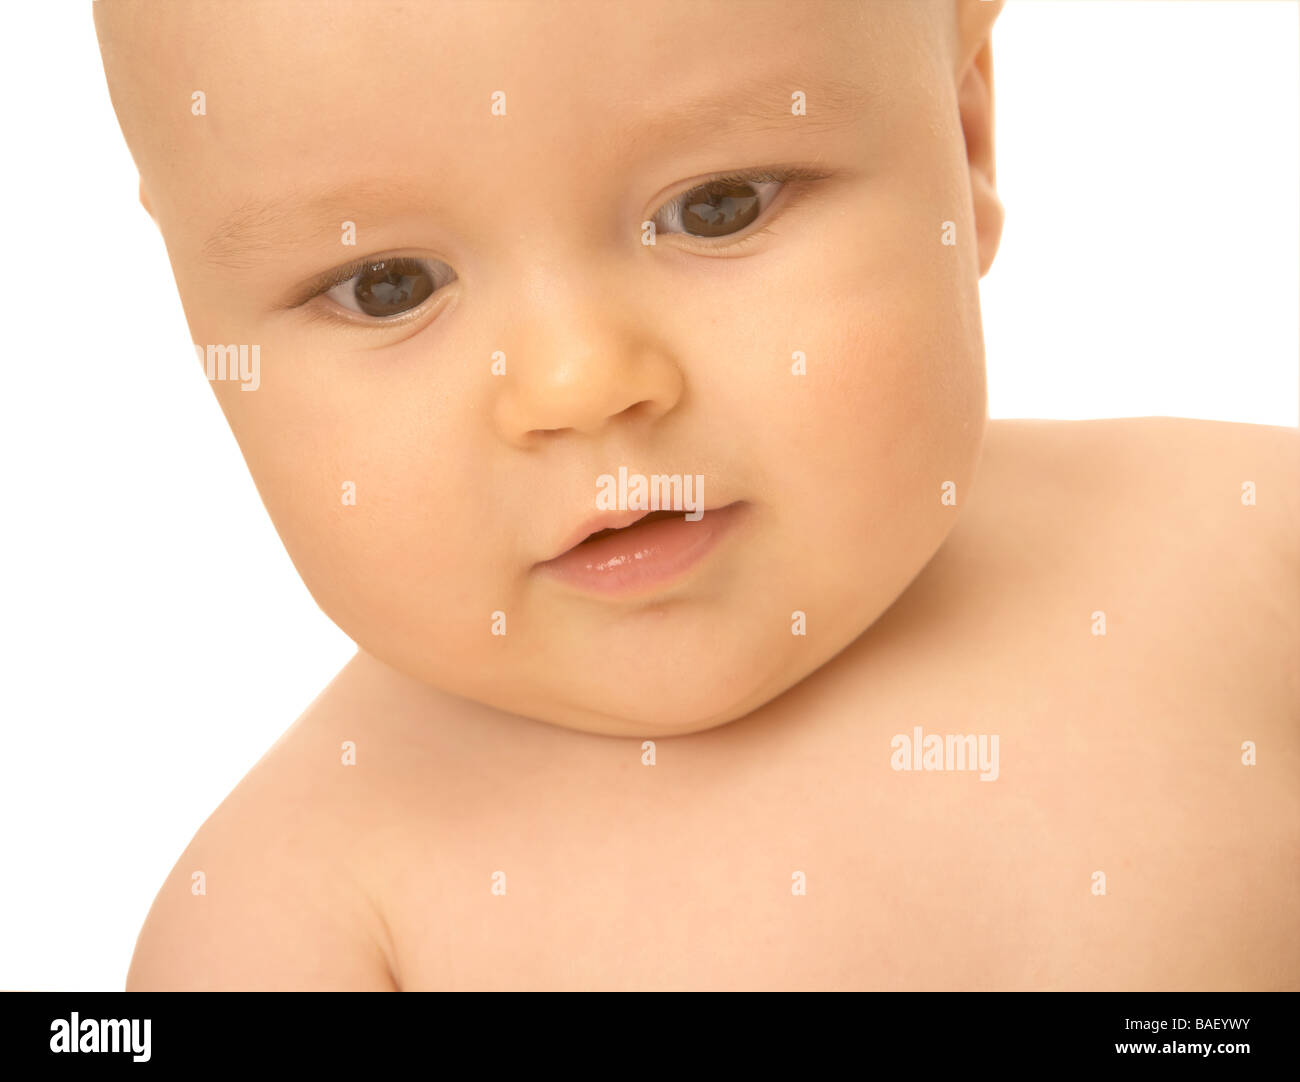 A baby looks downwards against a white backdrop Stock Photo